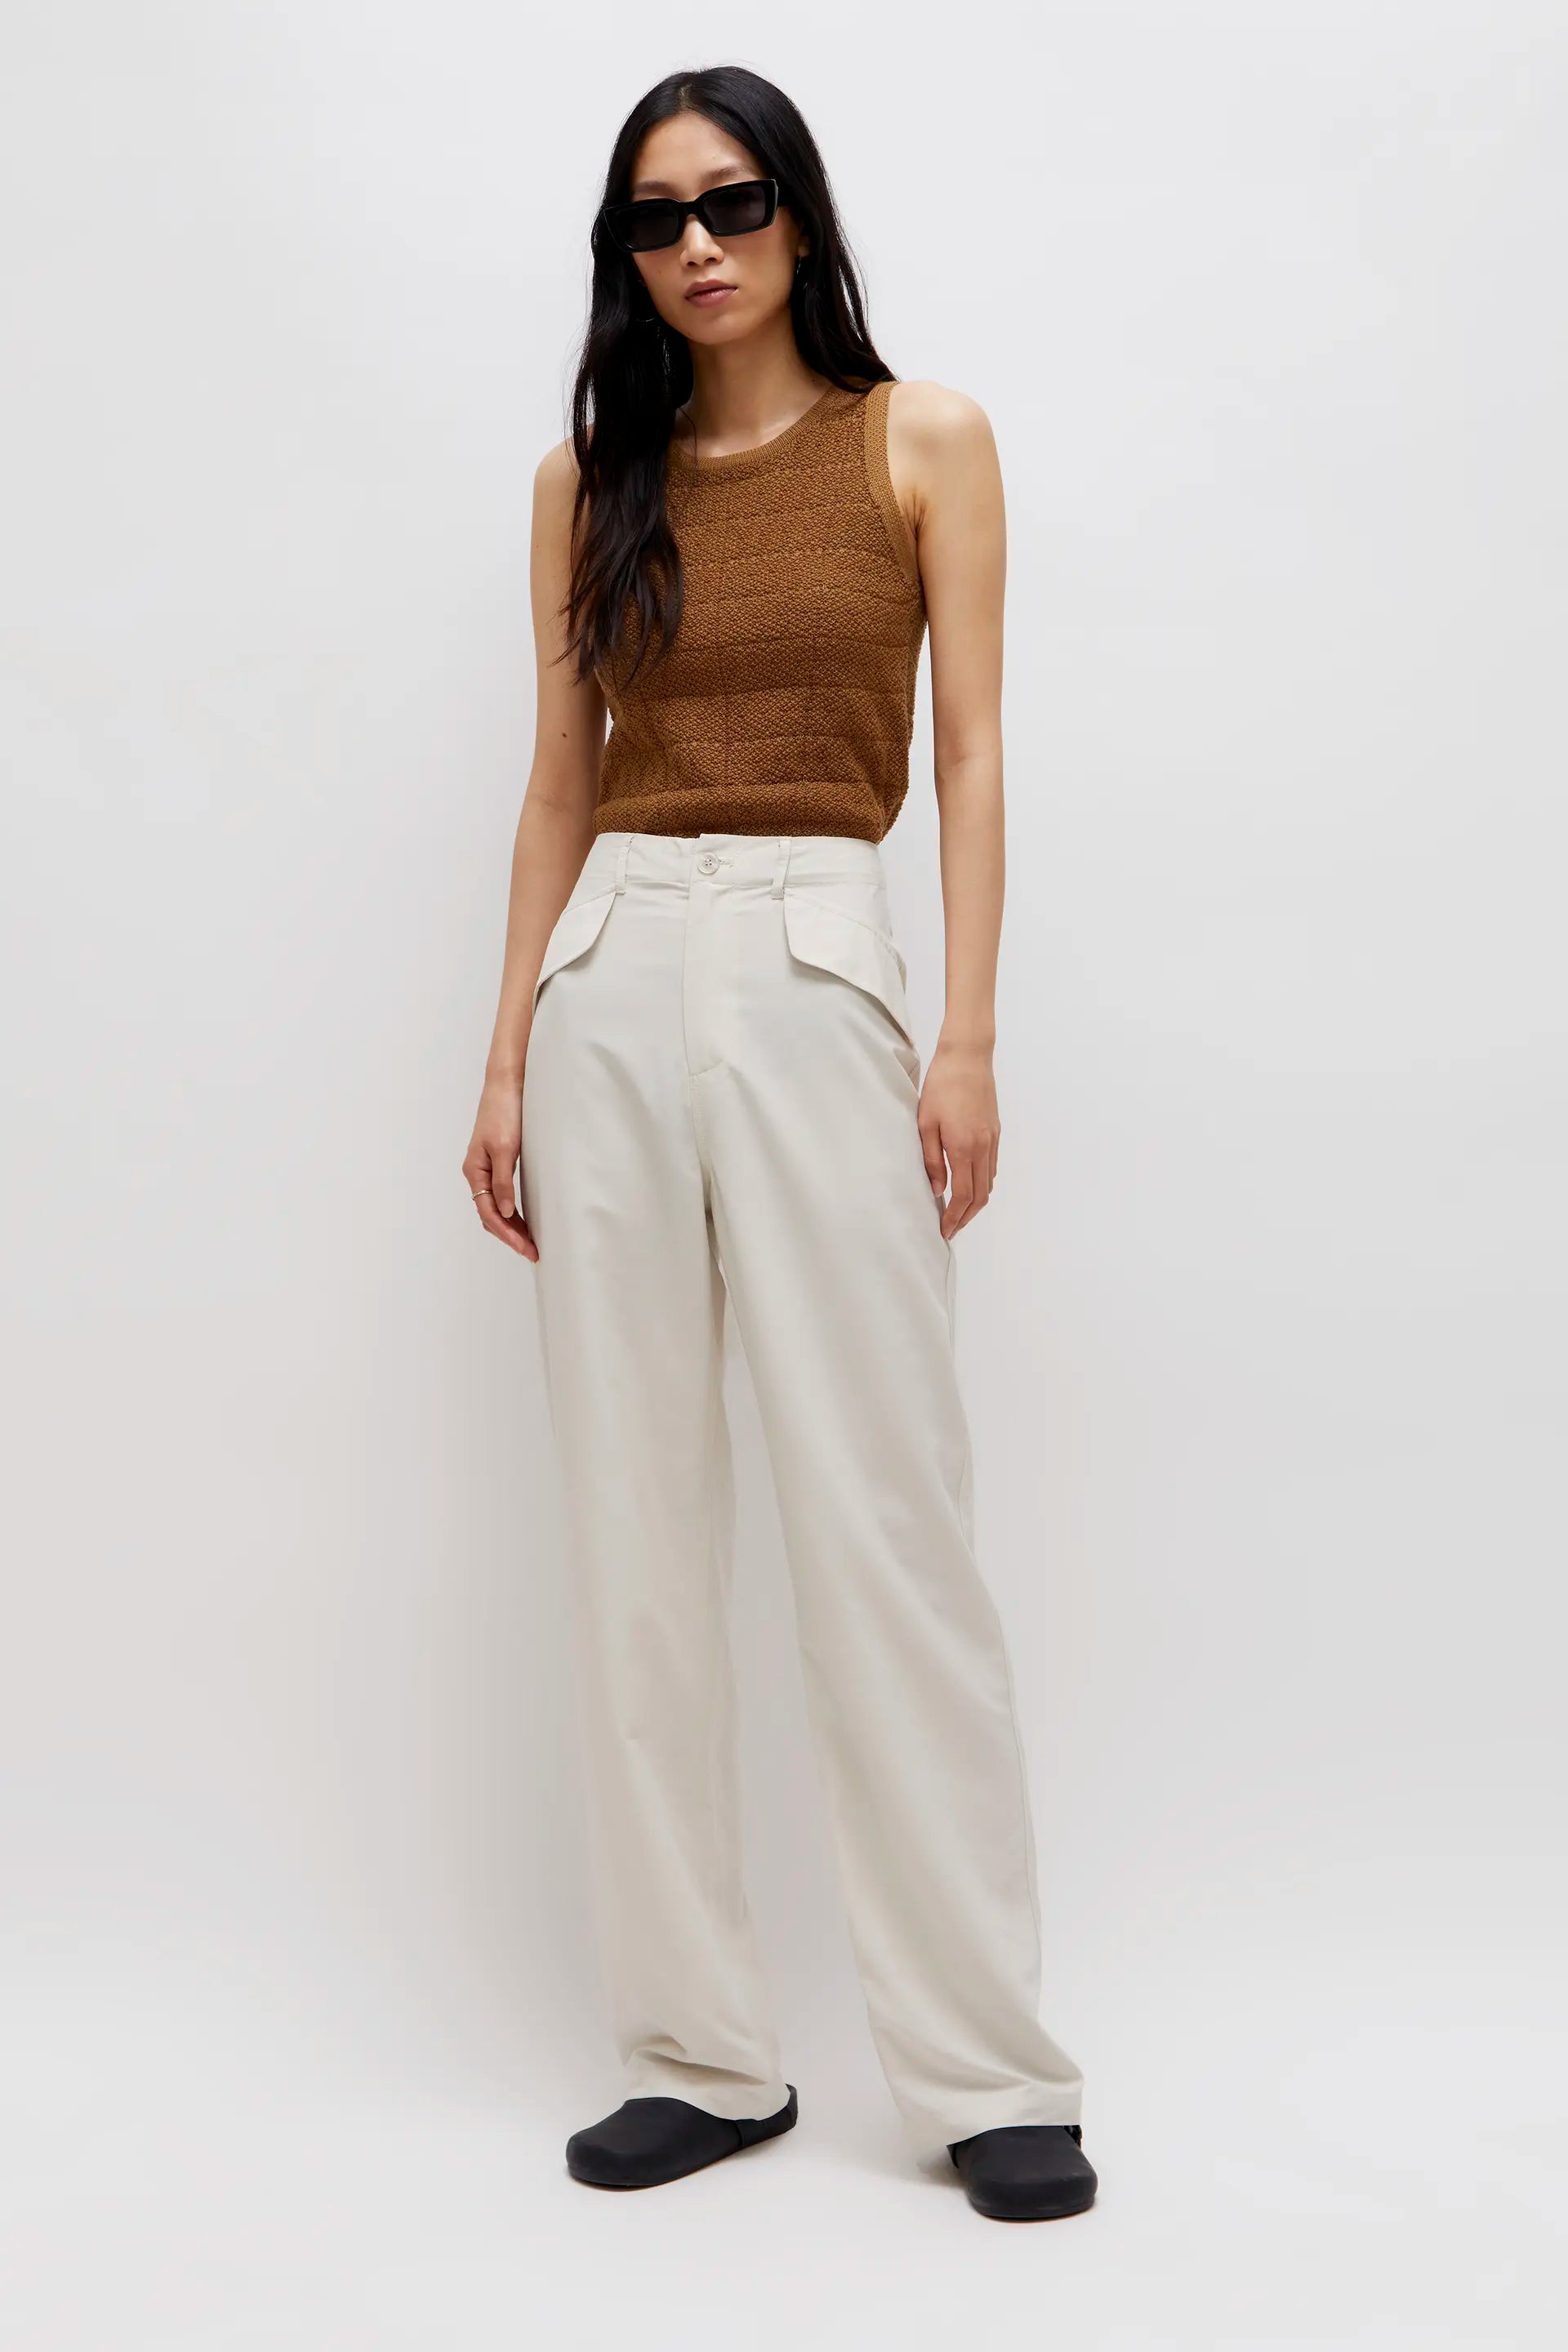 Wild Pony Straight white suit pants - clever alice